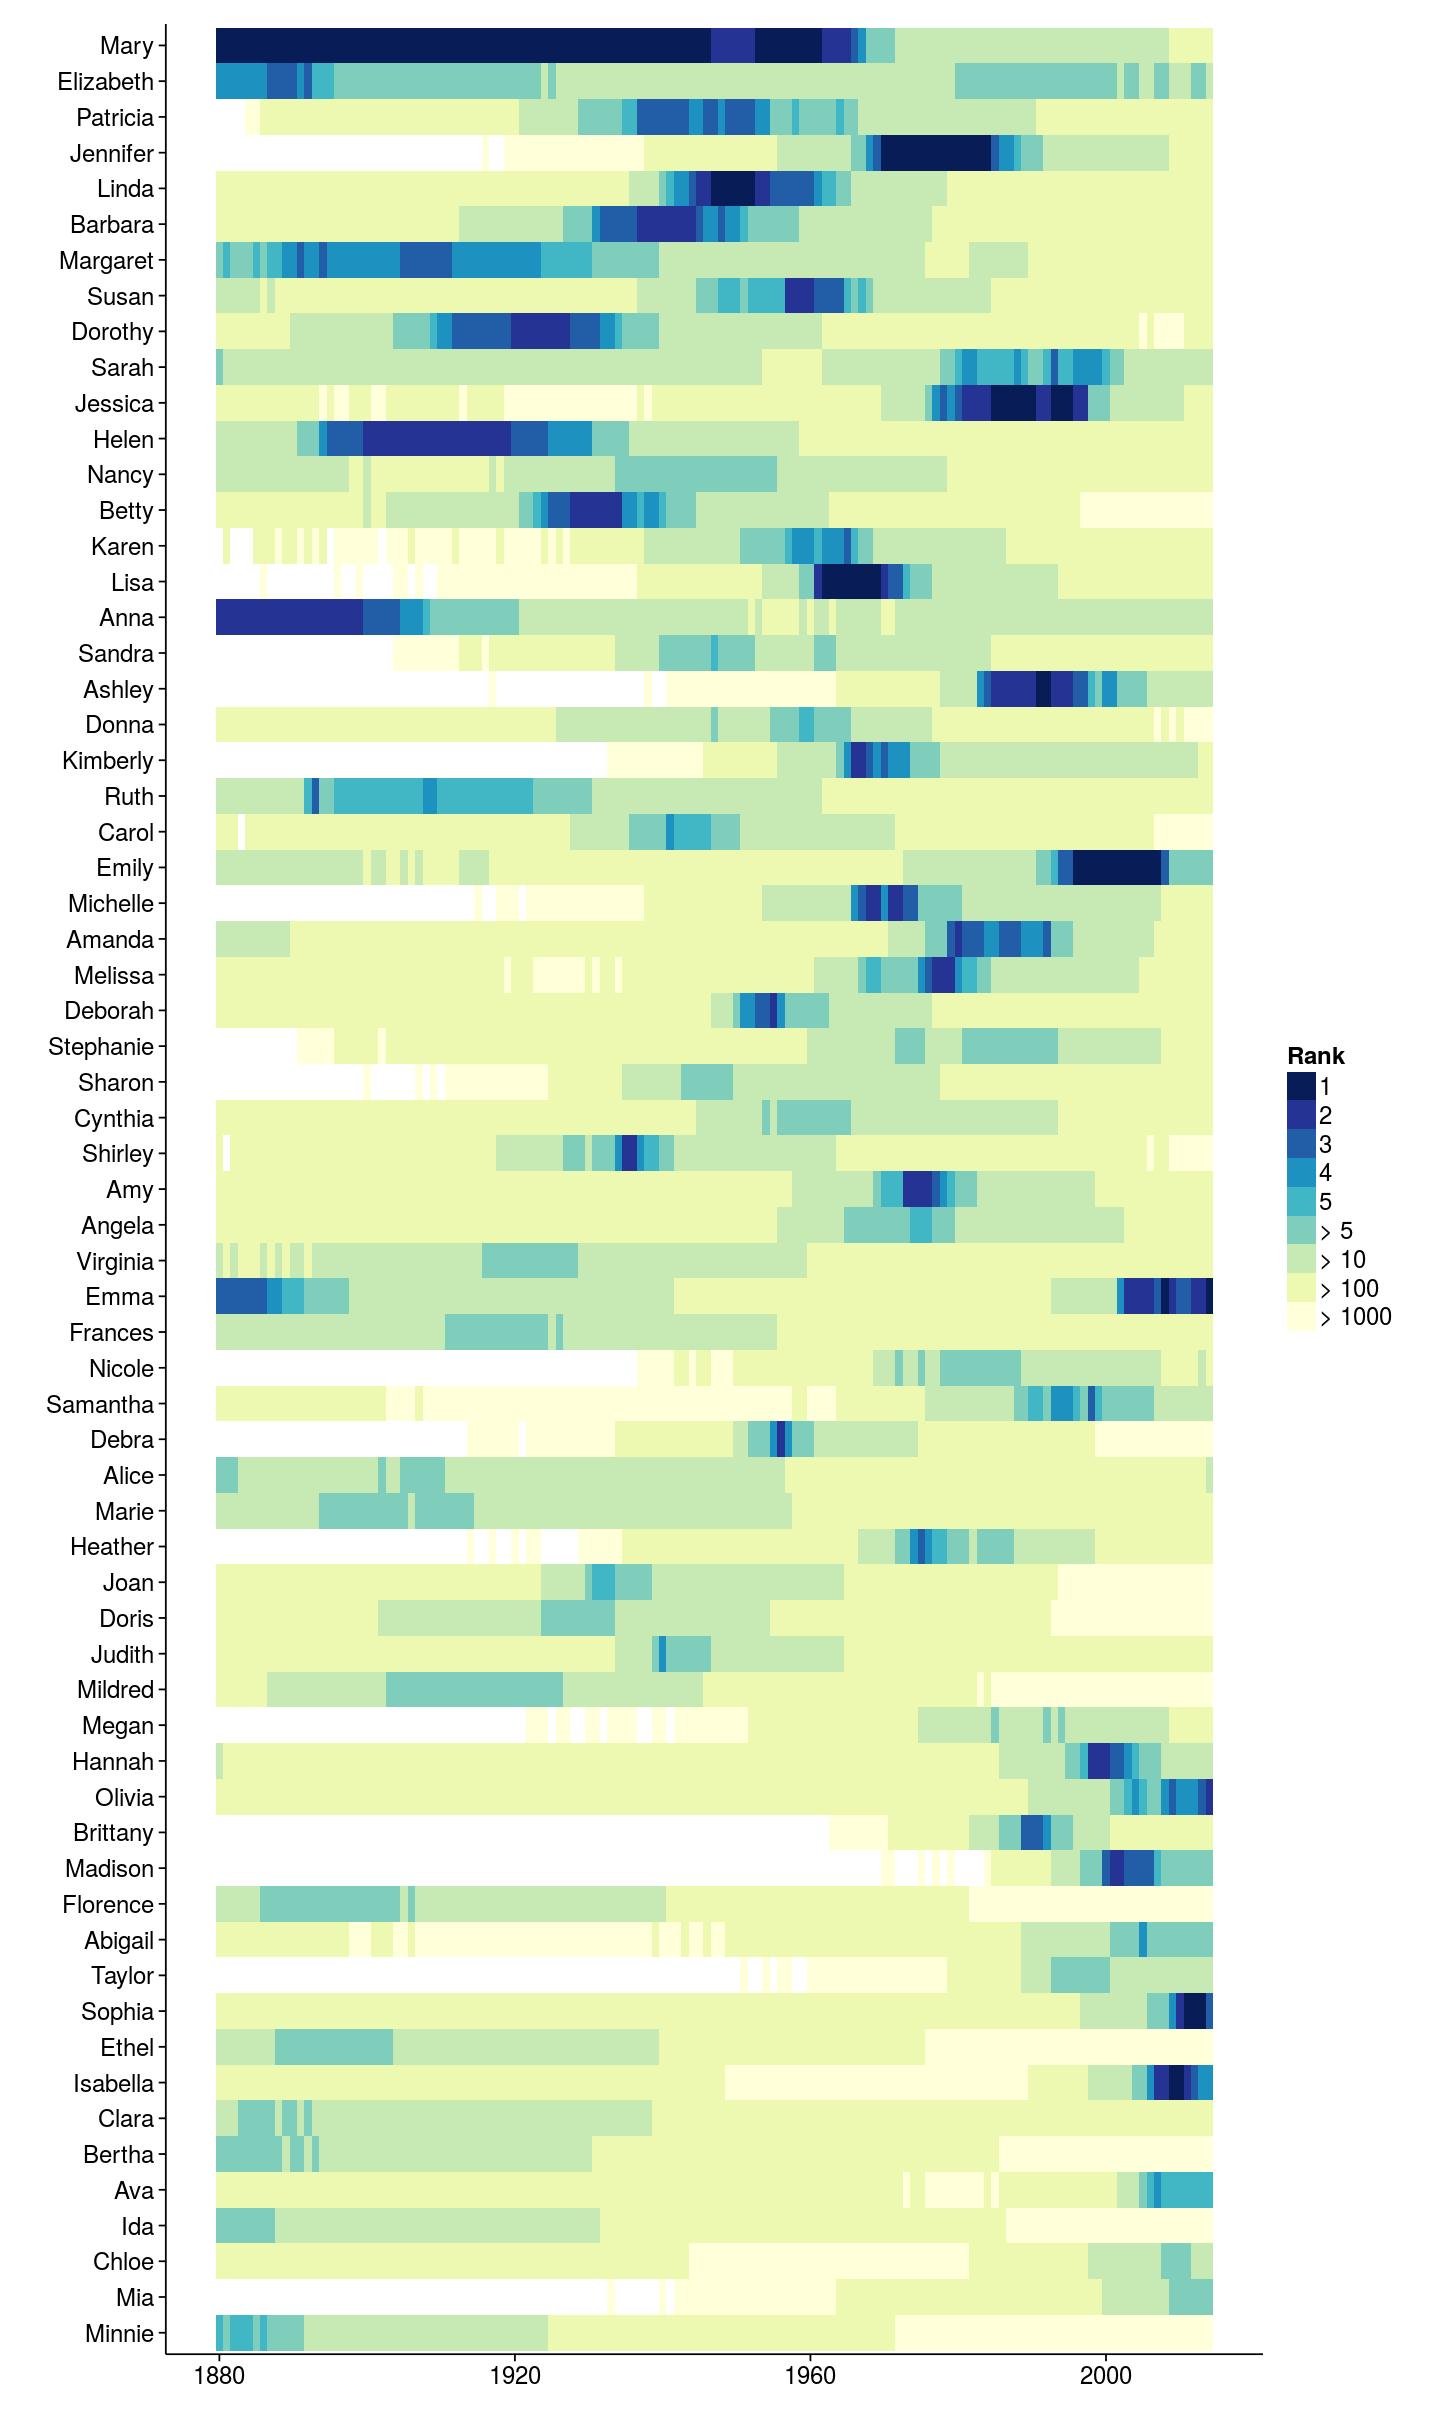 Heat map showing the popularity rank of various female names over time.